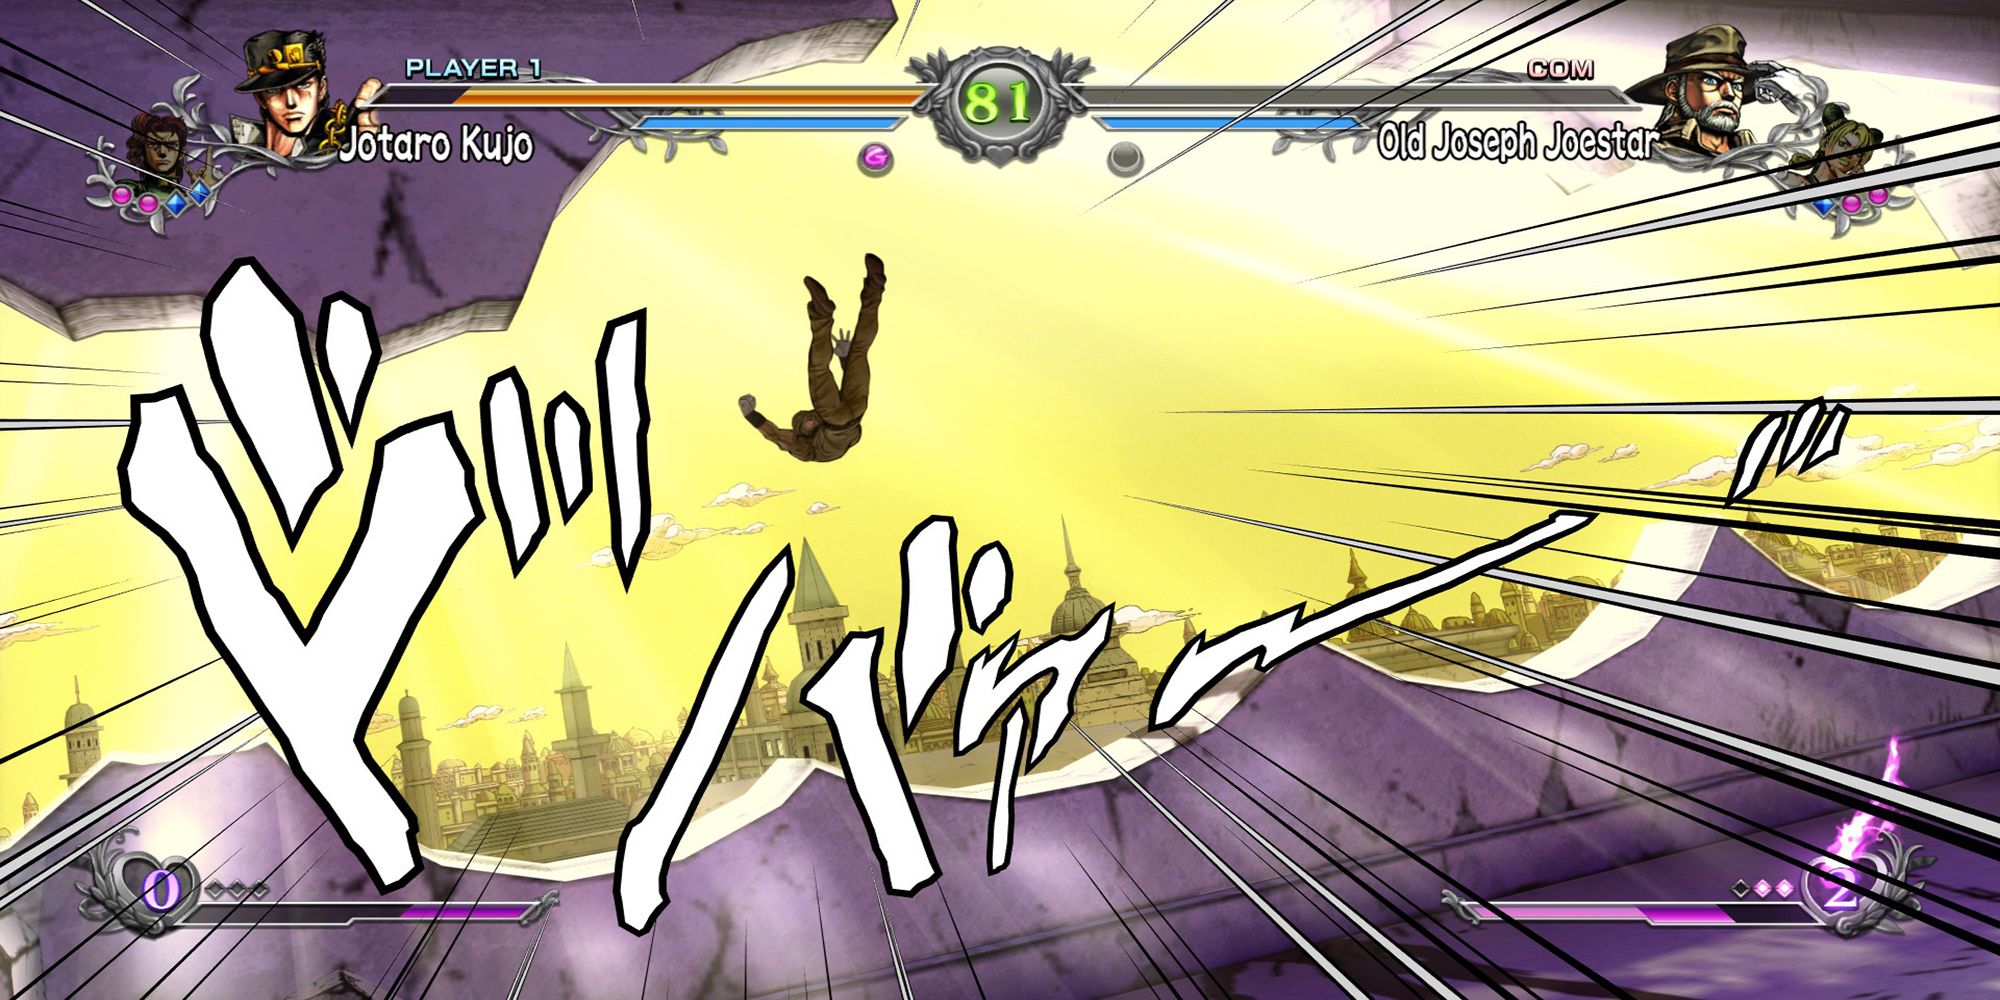 Old Joseph flies out of a wall opening in DIO's Mansion in a Dramatic Finish from JoJo's Bizarre Adventure ASBR.